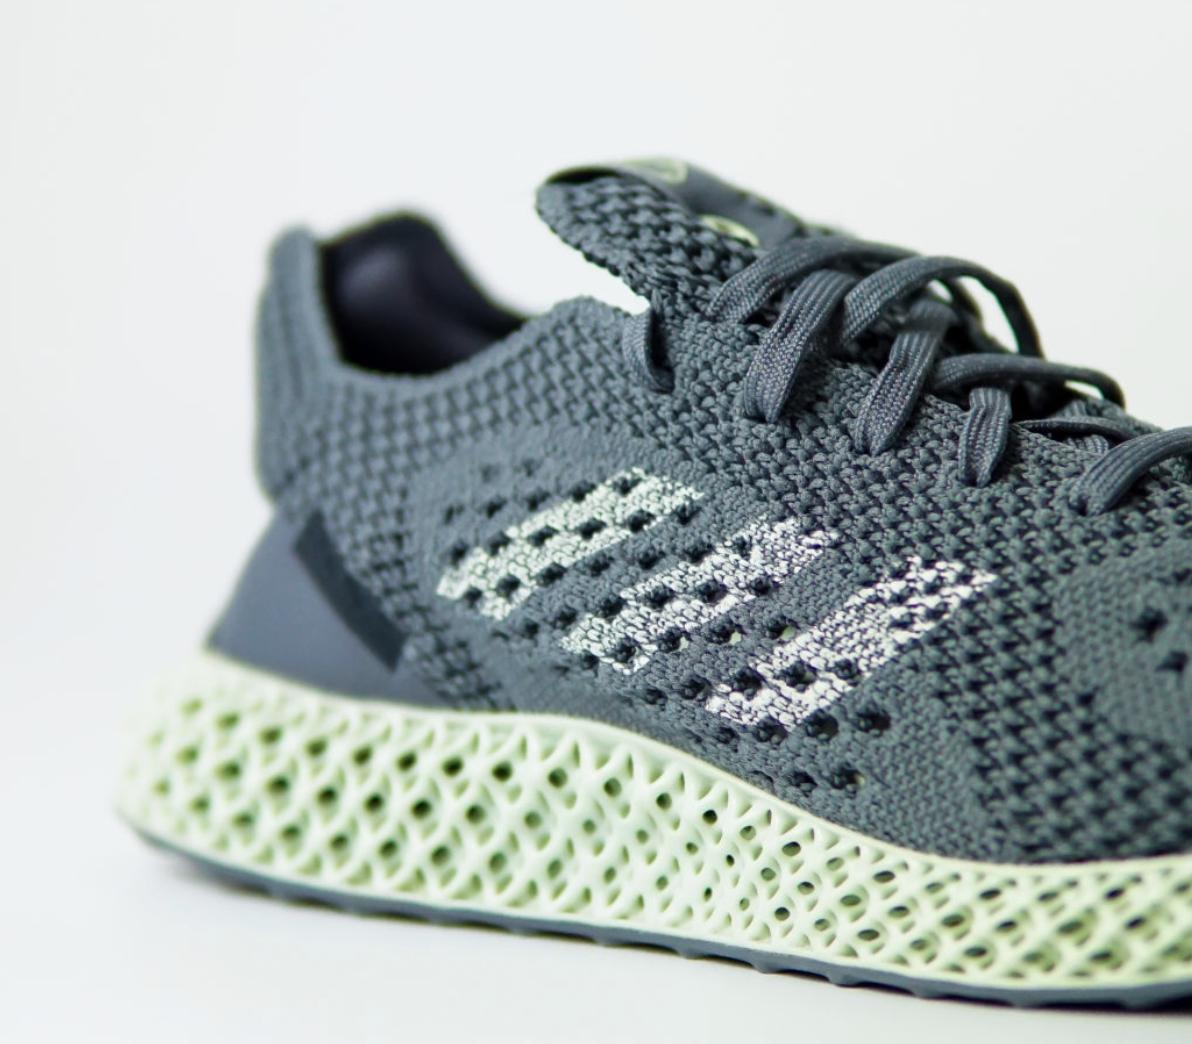 StockX on Twitter: "For the installment of our StockX Wear Test series, we're back with Hannah in the UK for a 30 day of the Futurecraft 4D. Read on: